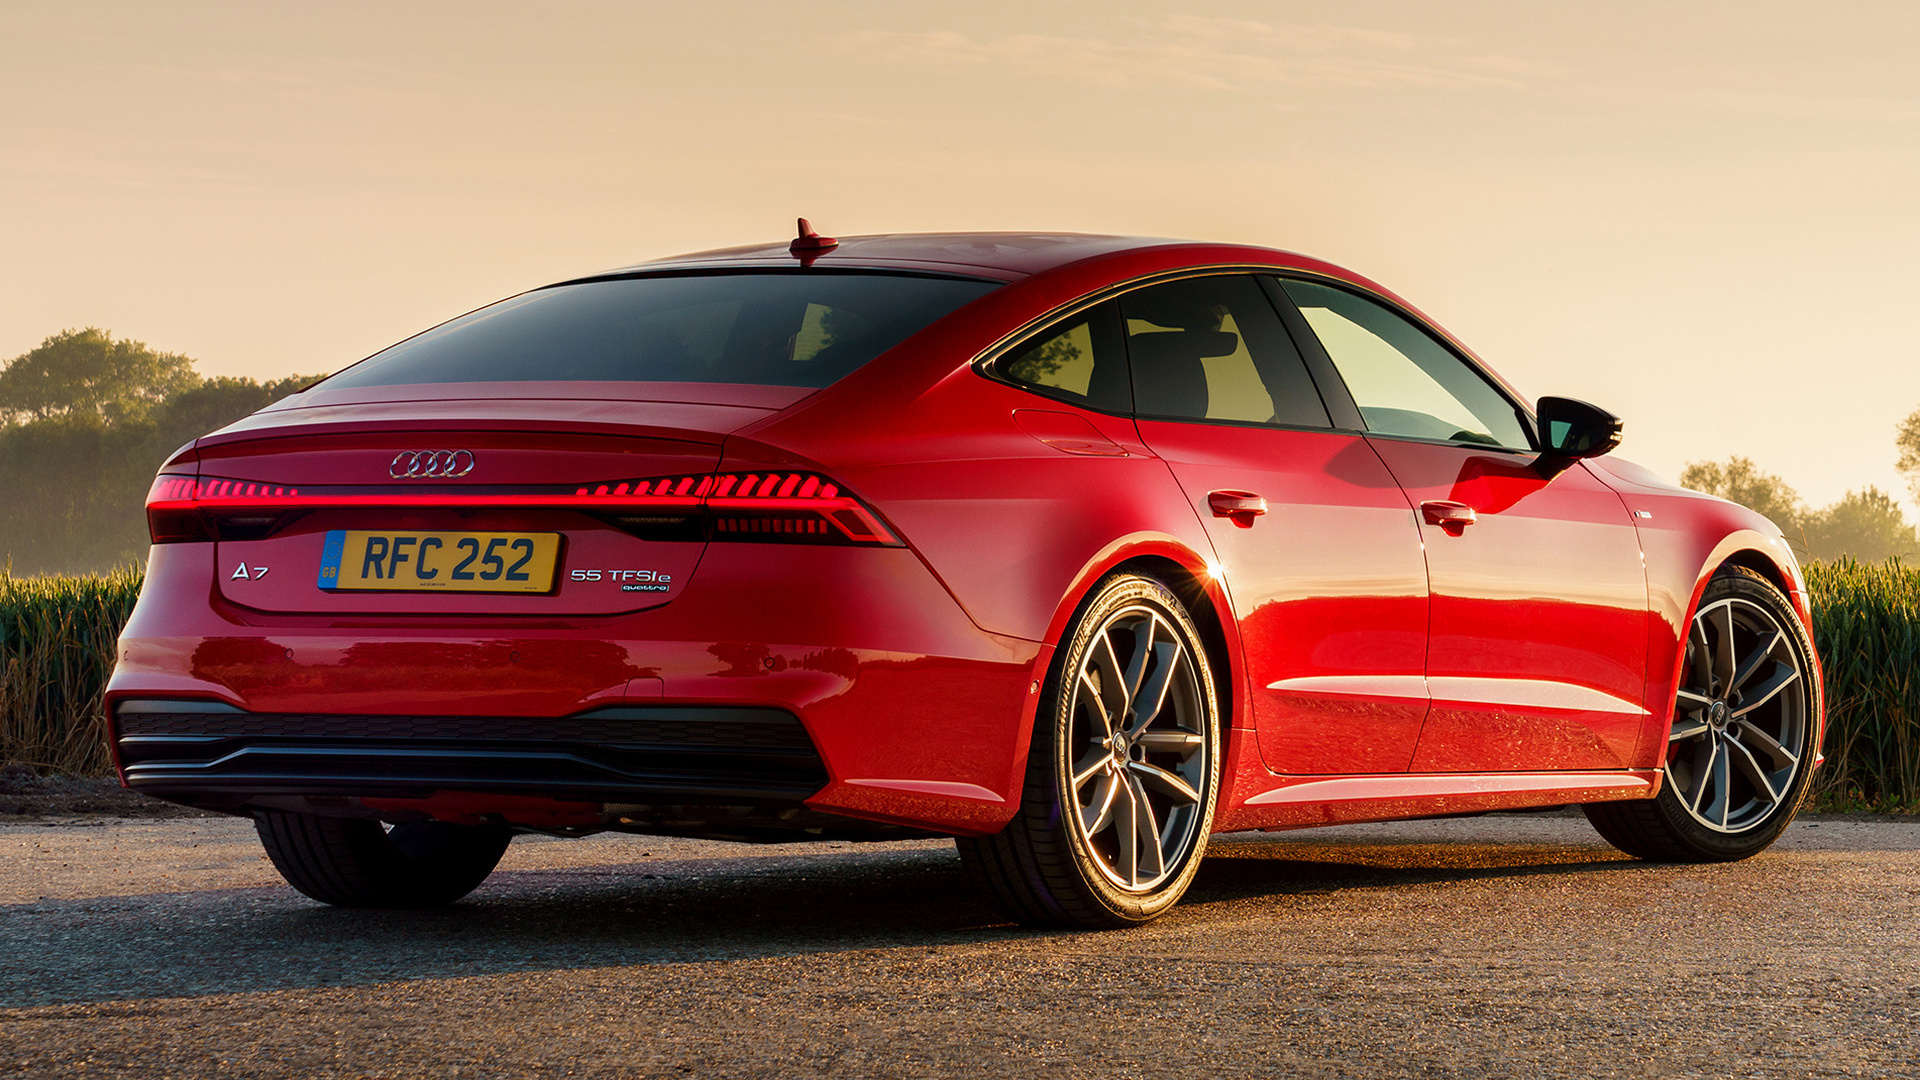 2020 Audi A7 Sportback PlugIn Hybrid S line (UK) Wallpapers and HD